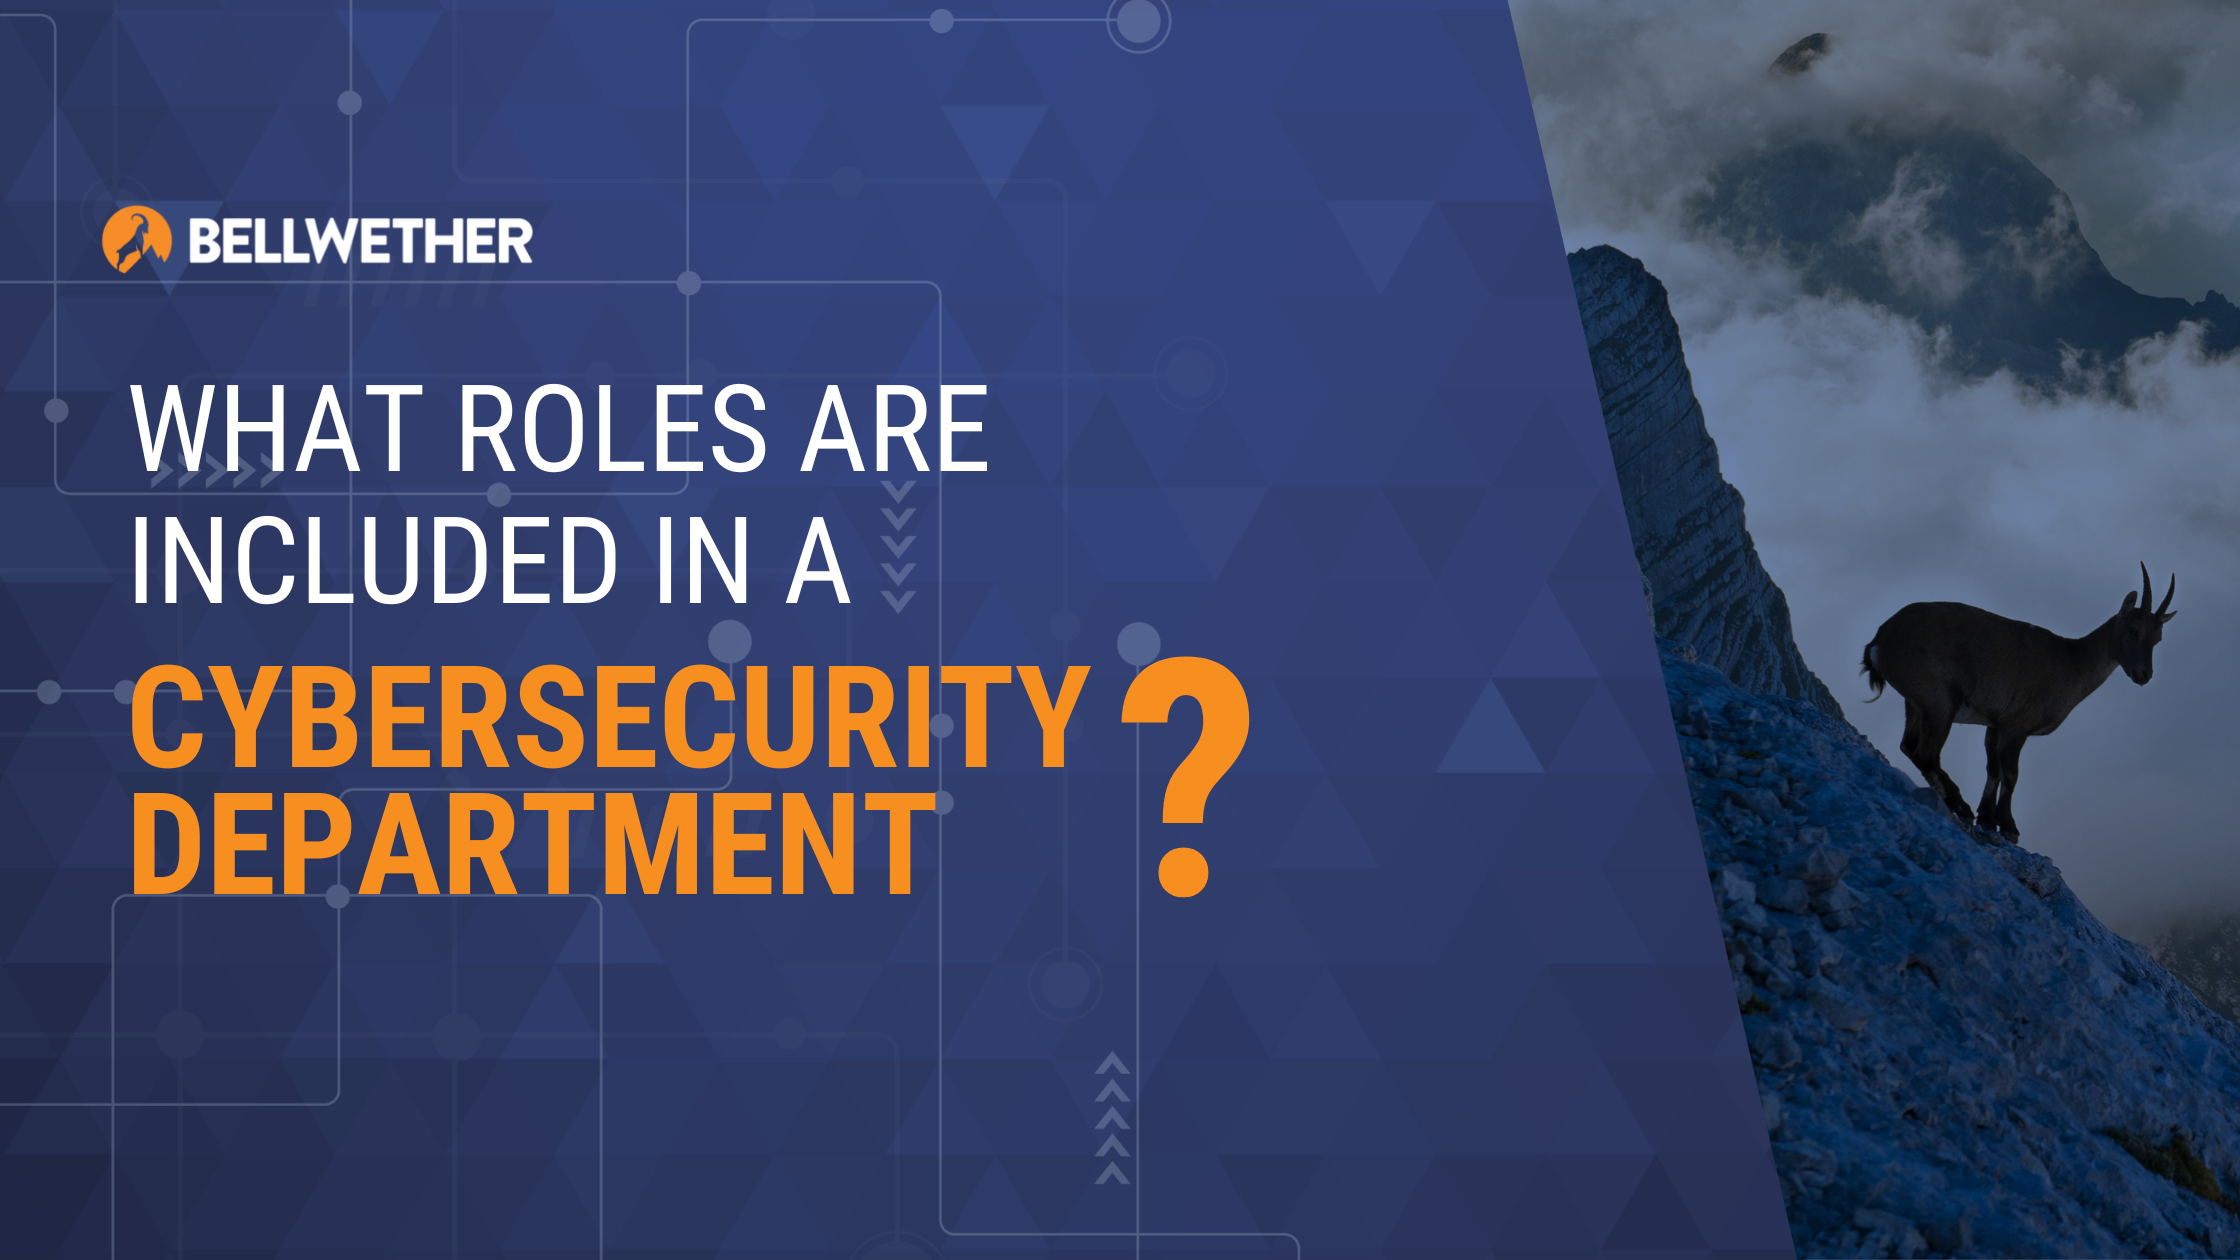 What's roles are included in a cybersecurity department?